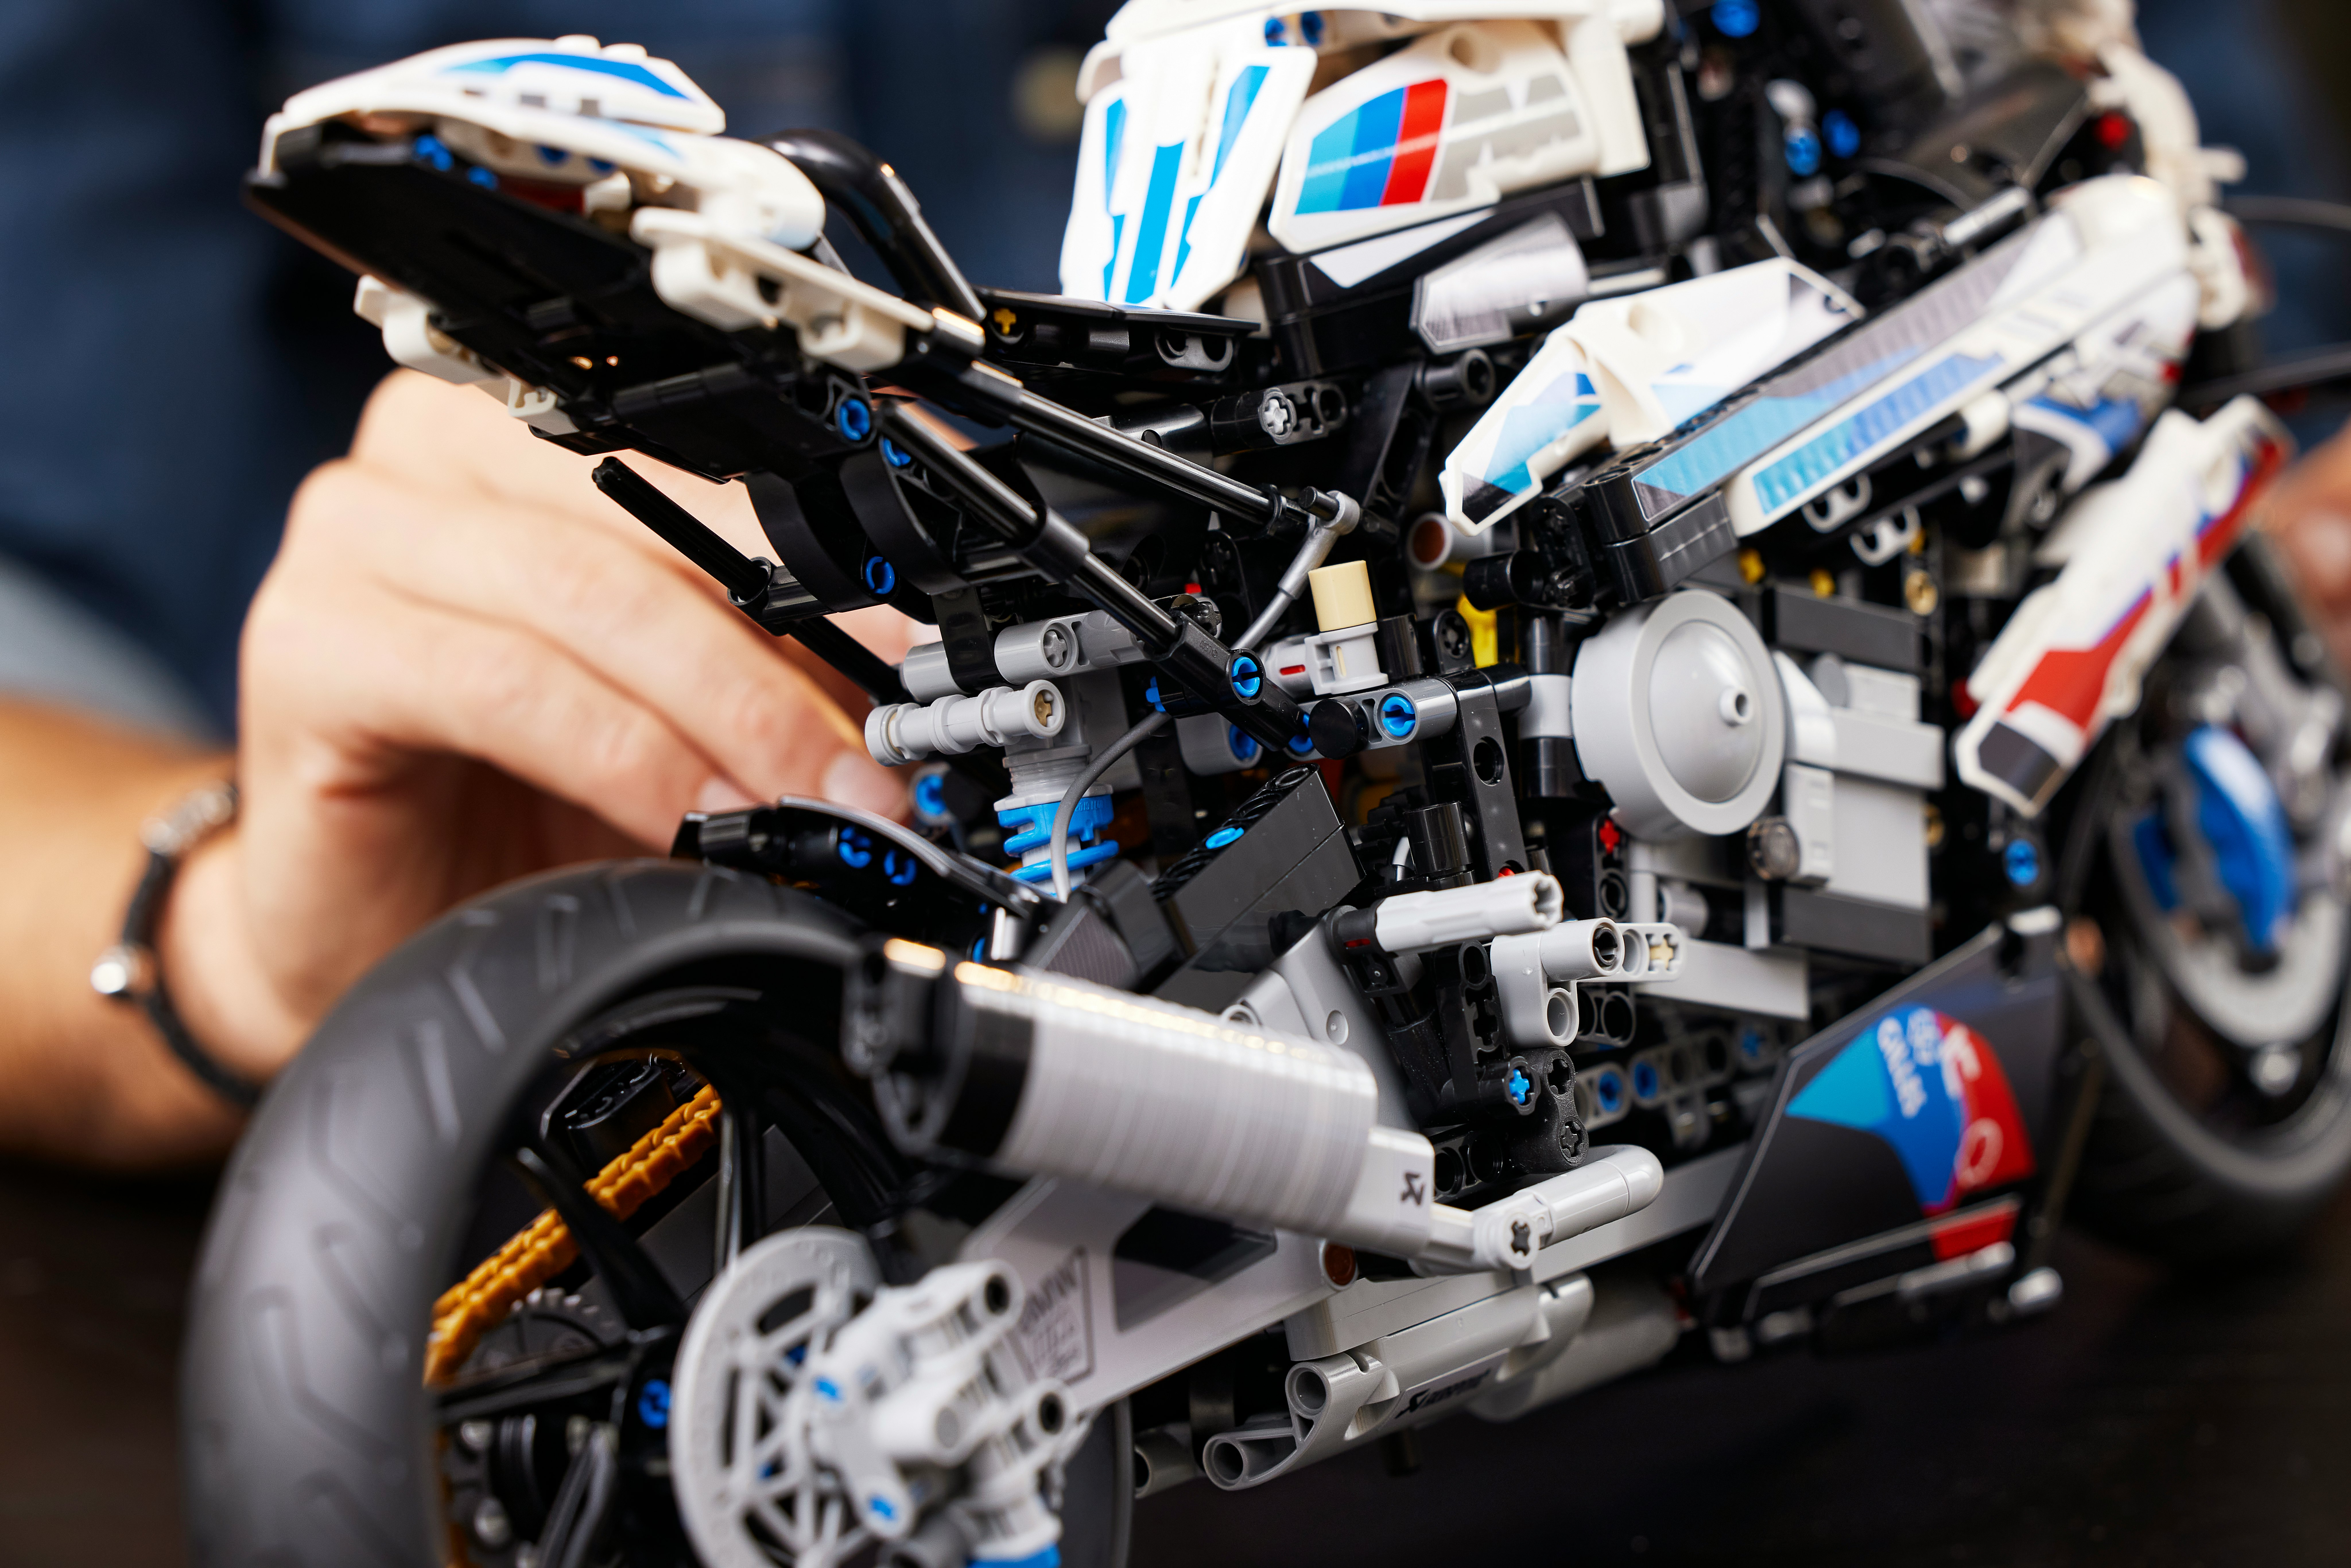 LEGO Technic Kit Inspires BMW to Build Hover Ride Design Concept